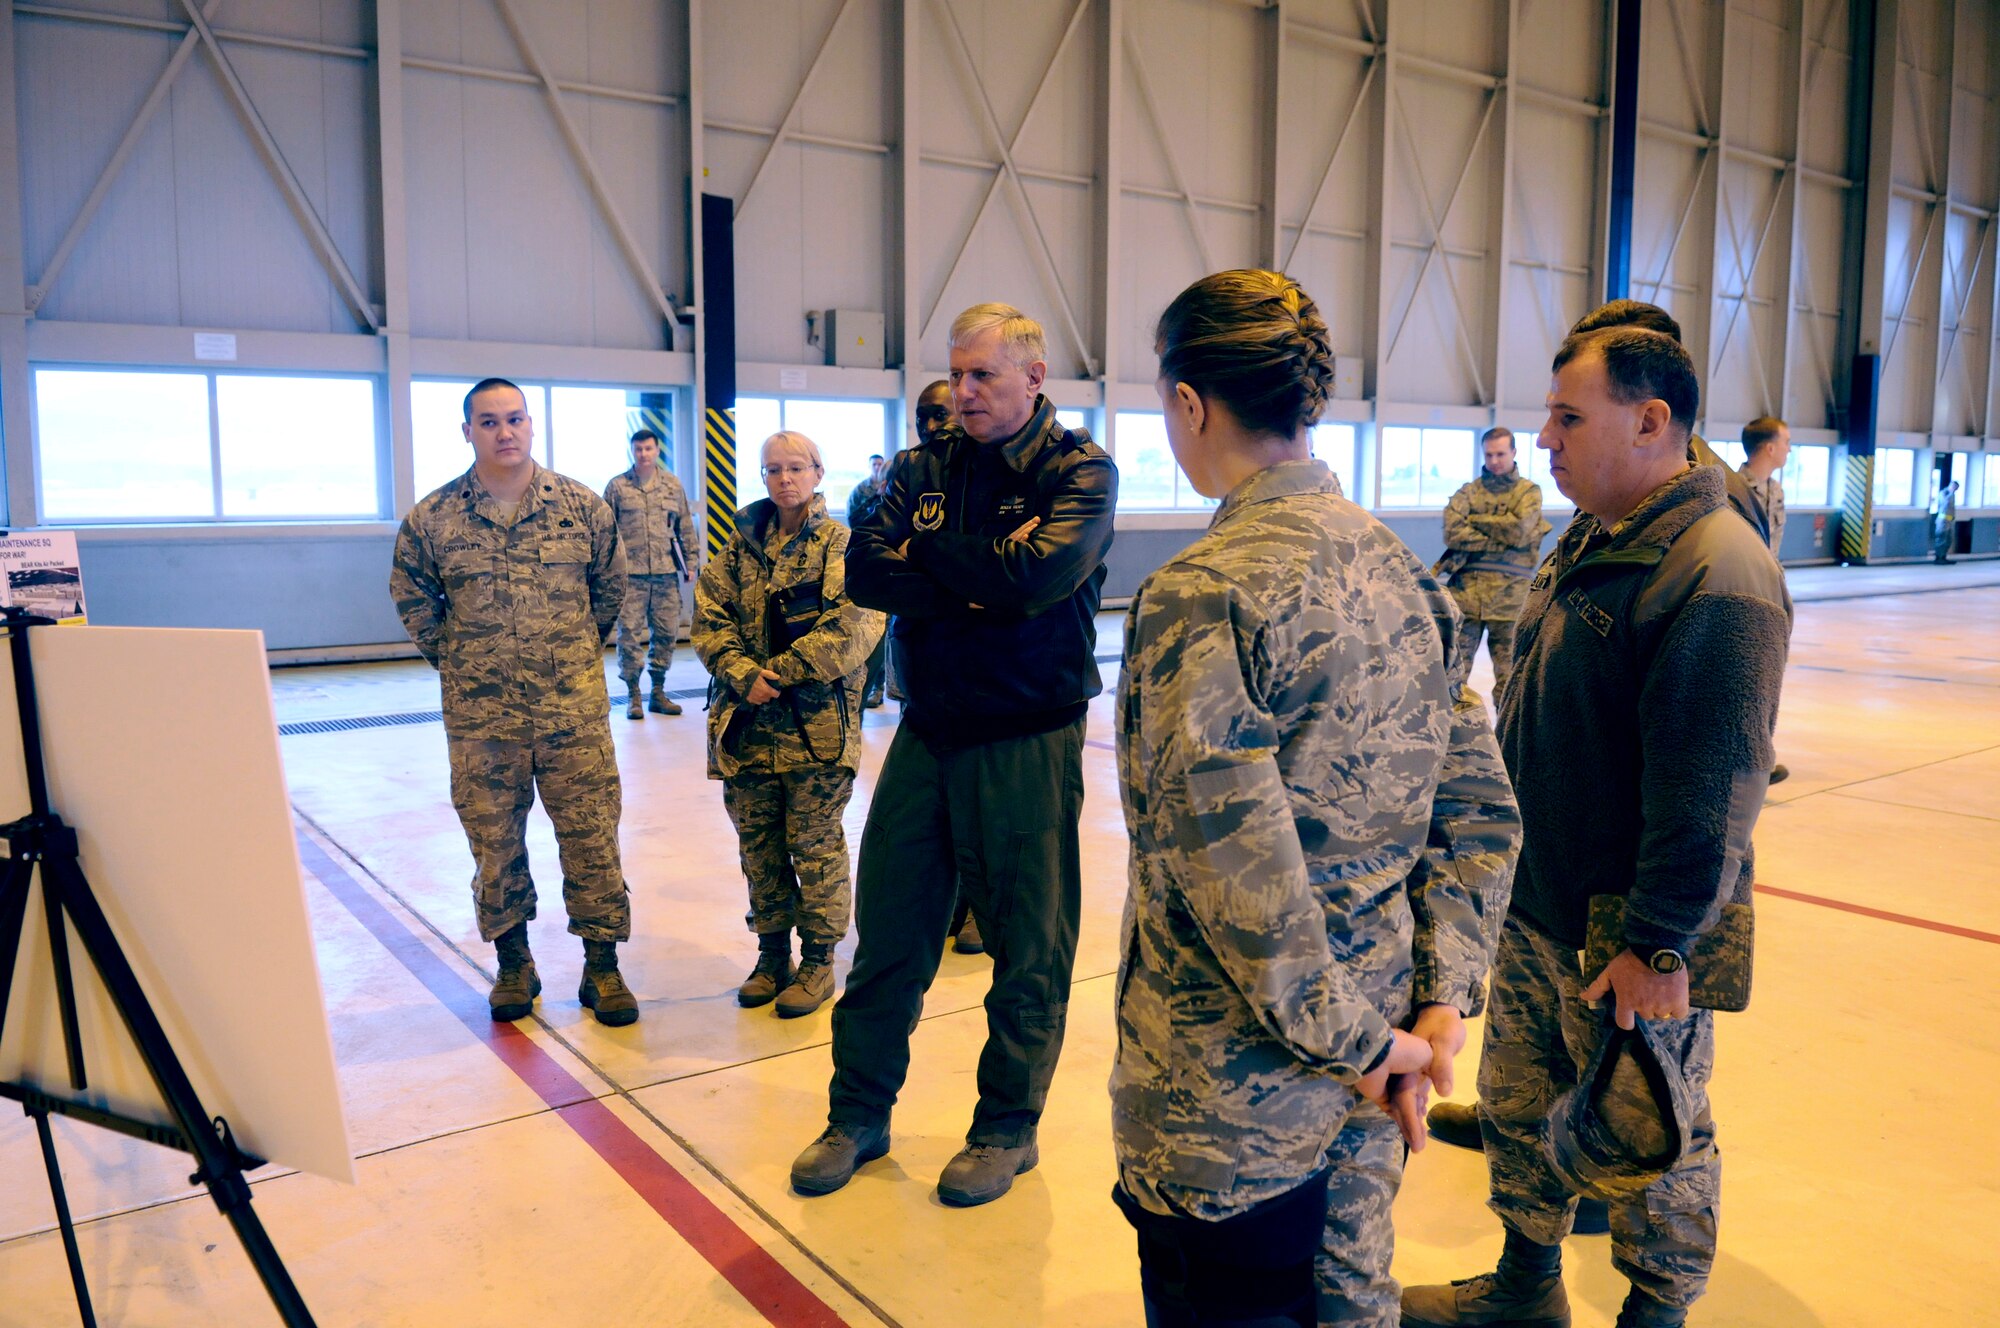 Gen. Roger A. Brady, U.S. Air Forces in Europe commander, receives a briefing from members of the 86th Material Maintenance Squadron during his visit to the 86th Airlift Wing, at Ramstein Air Base Germany, March 2.  The 86th MMS is actively supporting the major deployment surge to Afghanistan by packaging and transporting more than six million pounds of War Readiness Material from their warehouse in Luxembourg.   (U.S. Air Force Photo by: Airman 1st Class Brittany Perry)